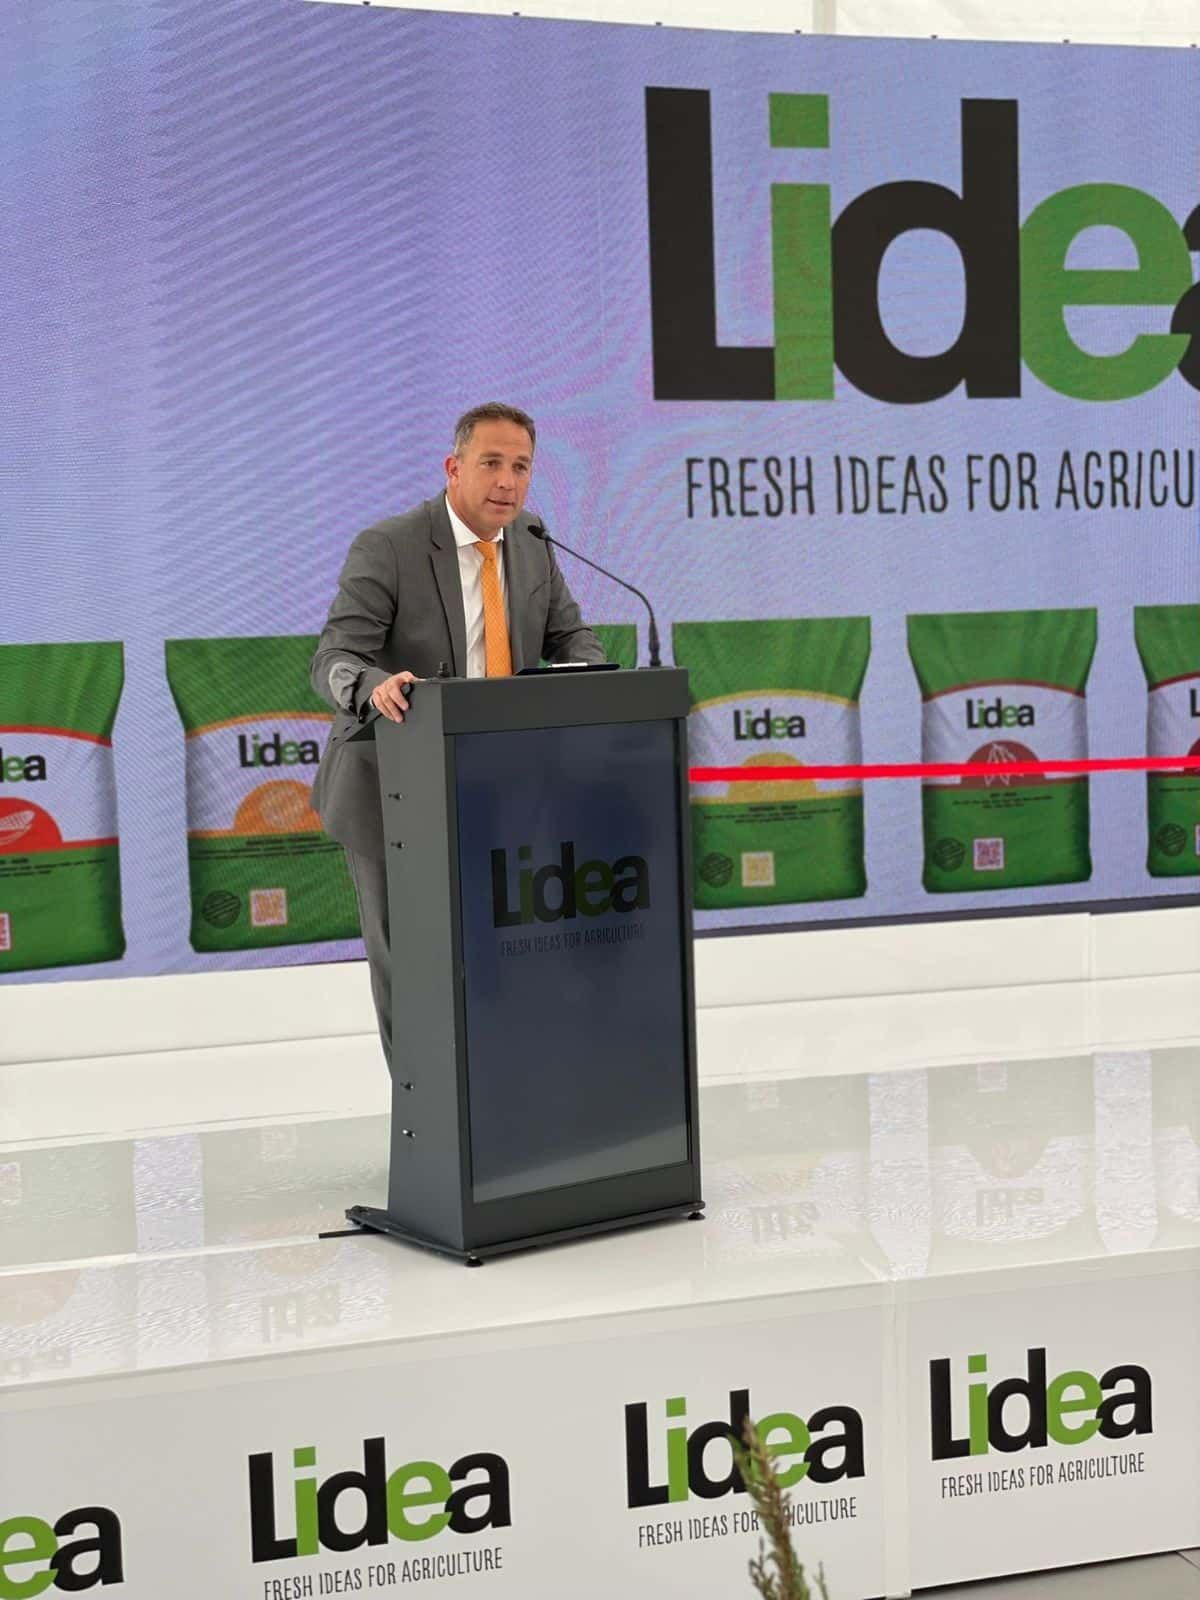 LIDEA OPENS NEW SEED PRODUCTION AND PACKAGING PLANT IN BRĂILA, ROMANIA